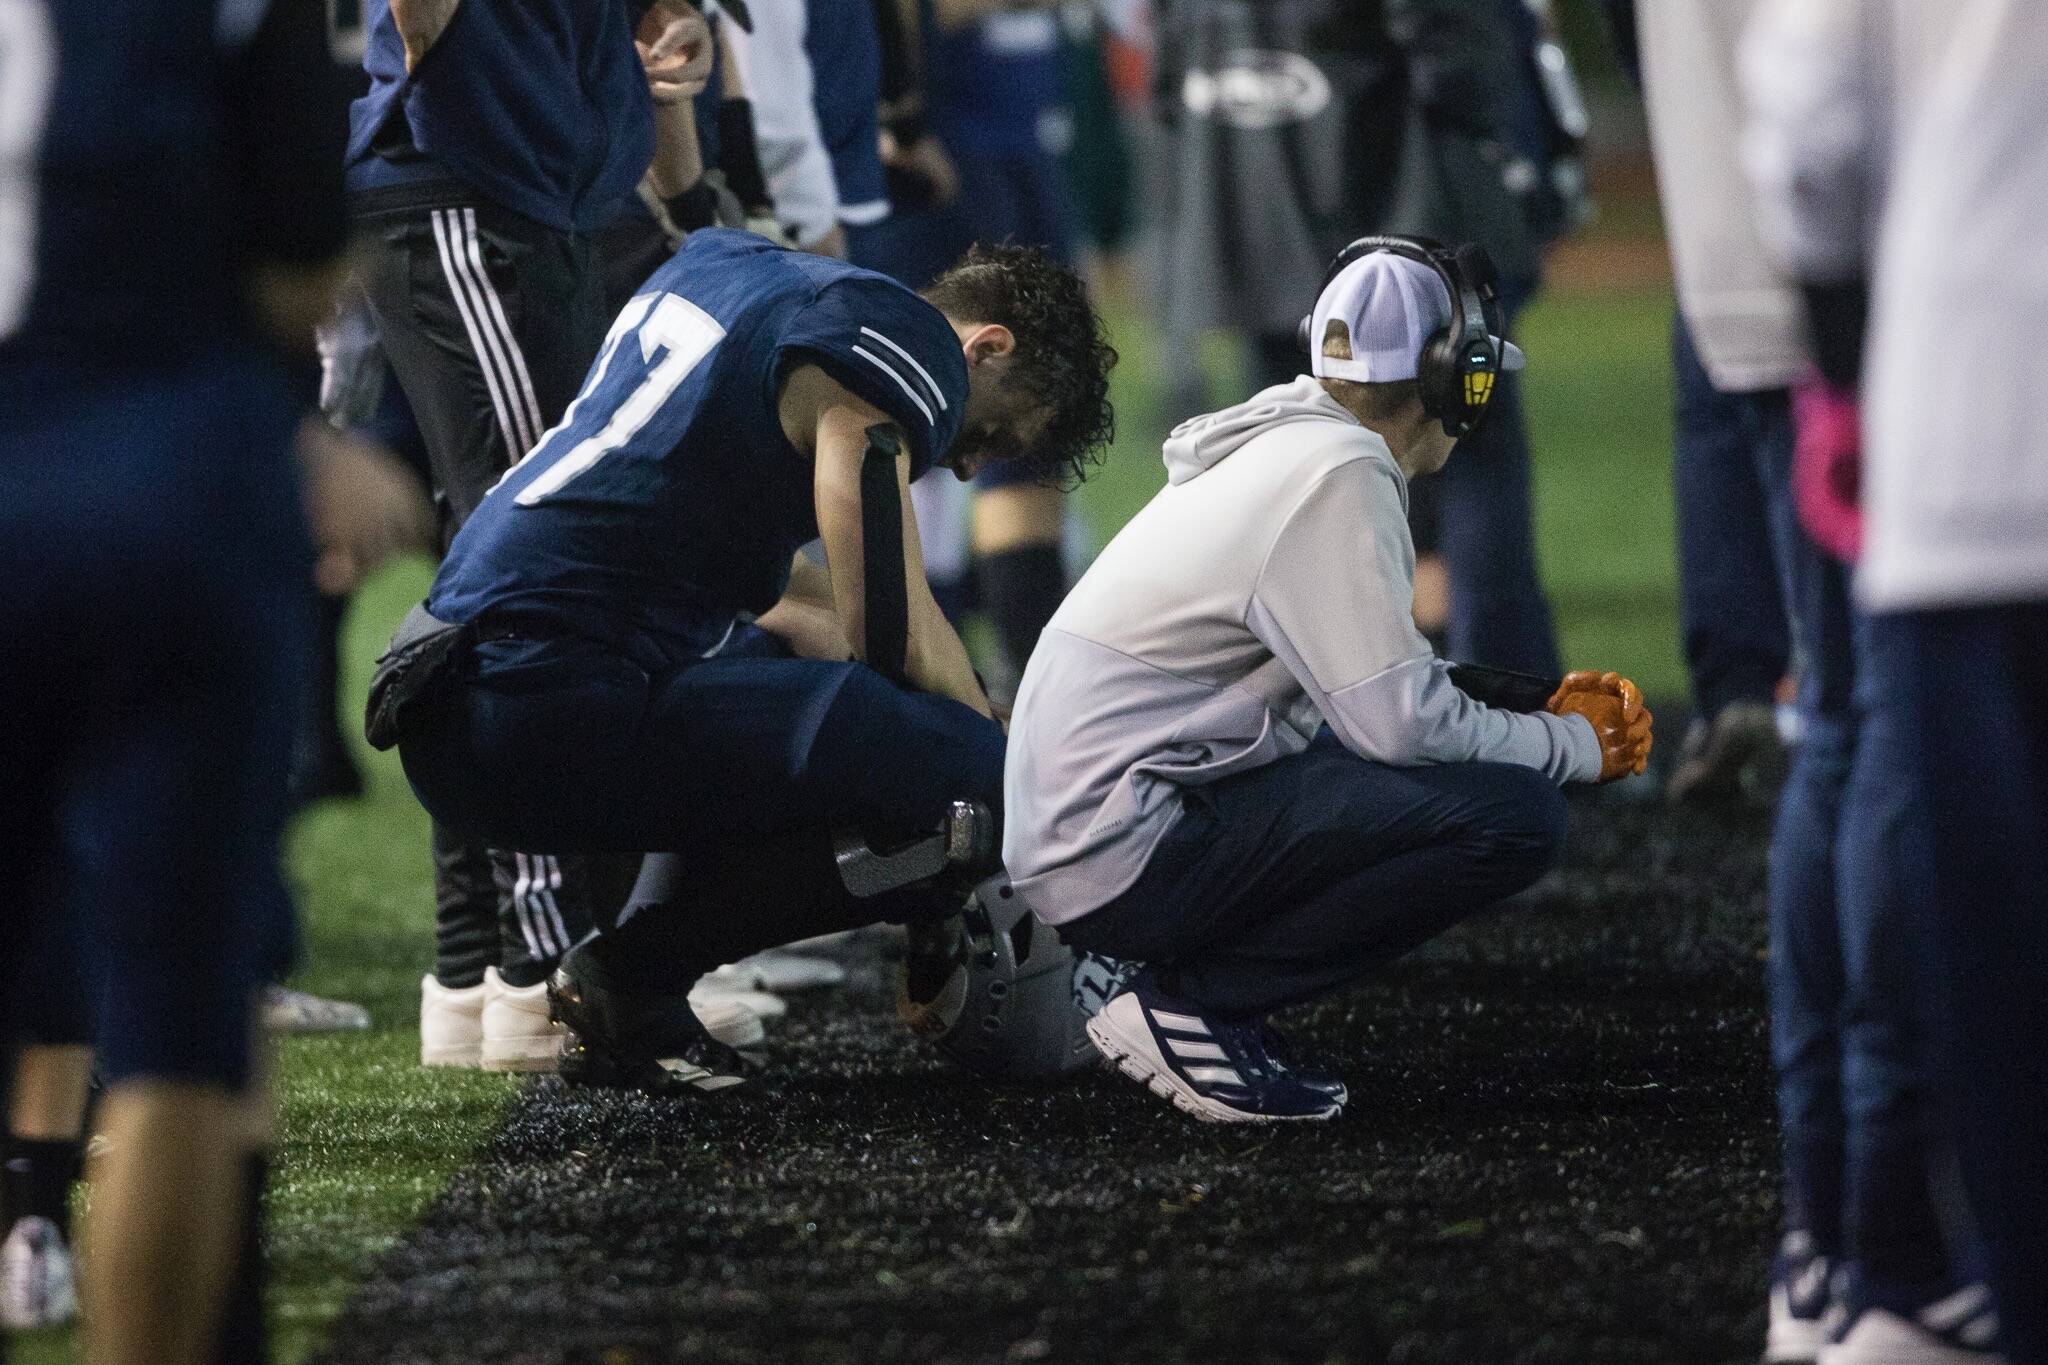 Glacier Peak's Joe Johnson and a coach react to losing to Bothell and being knocked out of the playoffs on Friday, Nov. 12, 2021 in Snohomish, Wa. (Olivia Vanni / The Herald)